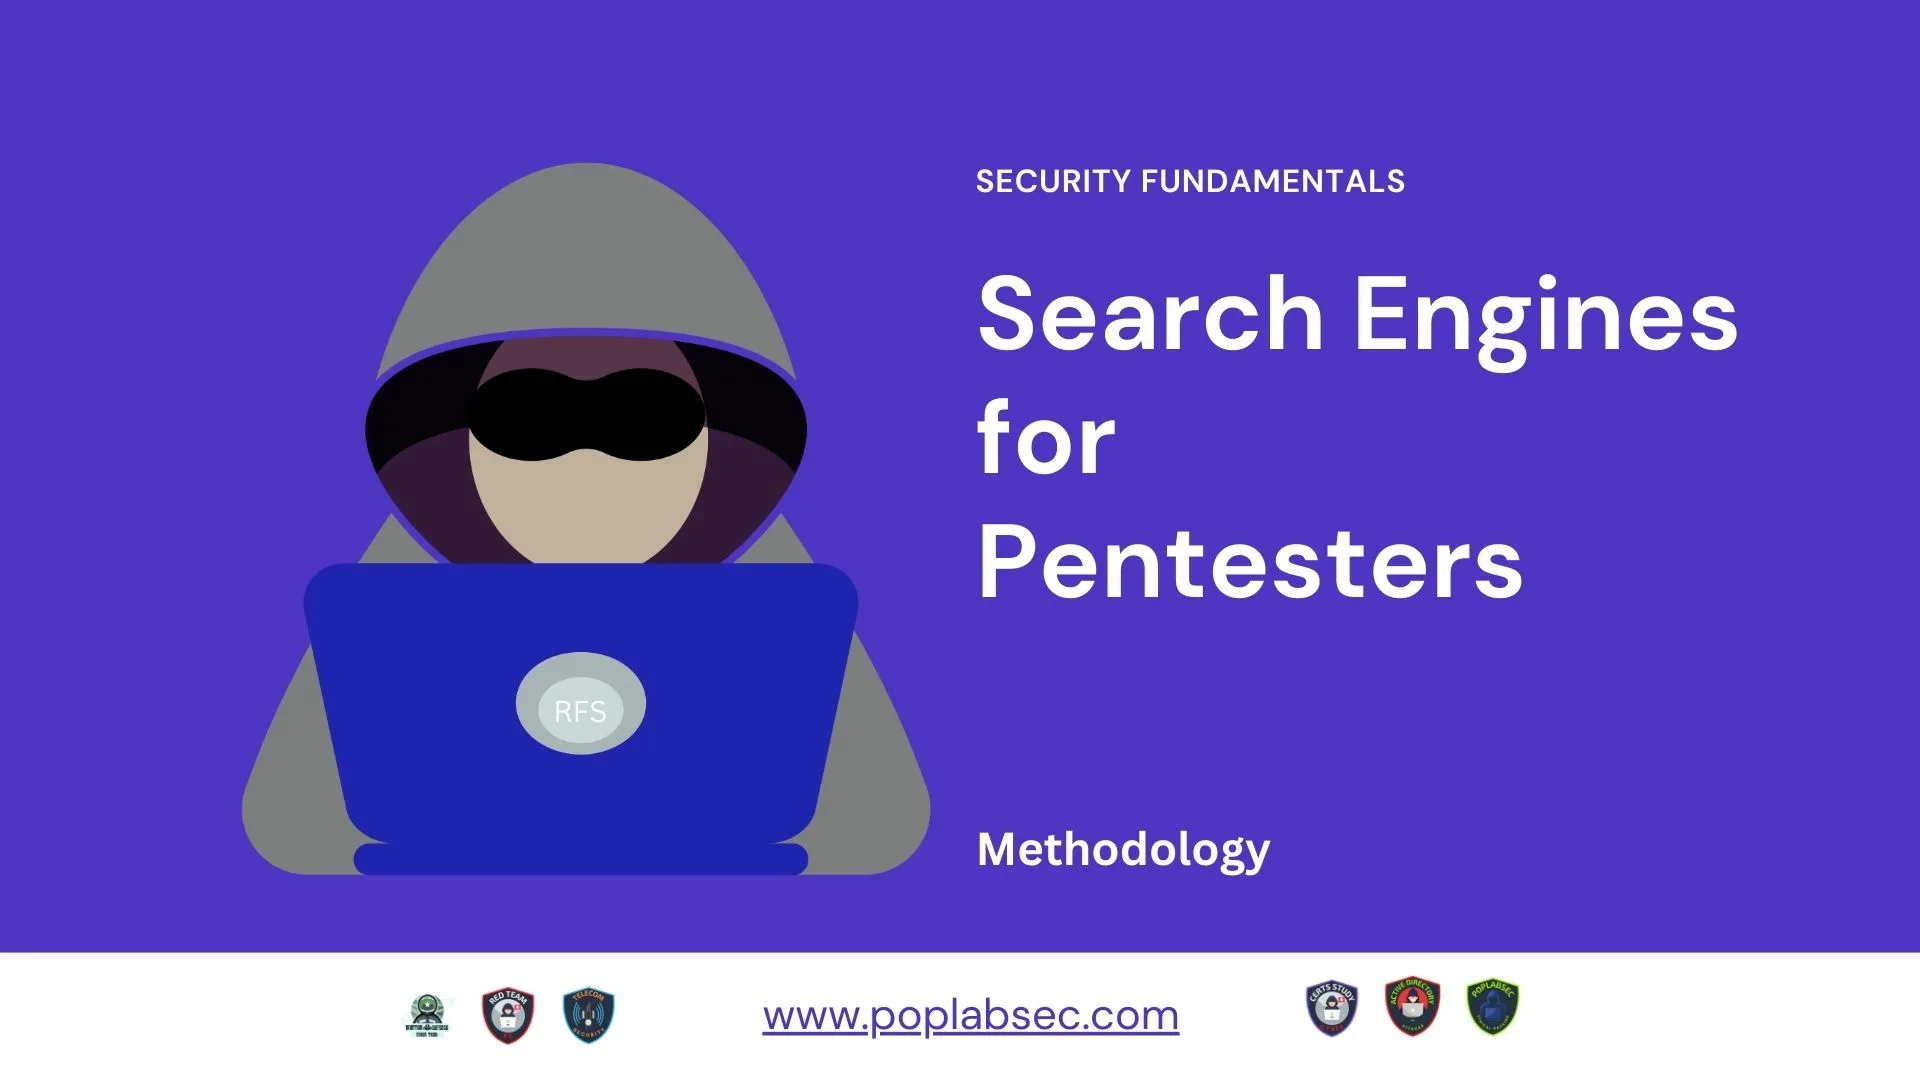 Search Engines for Pentesters